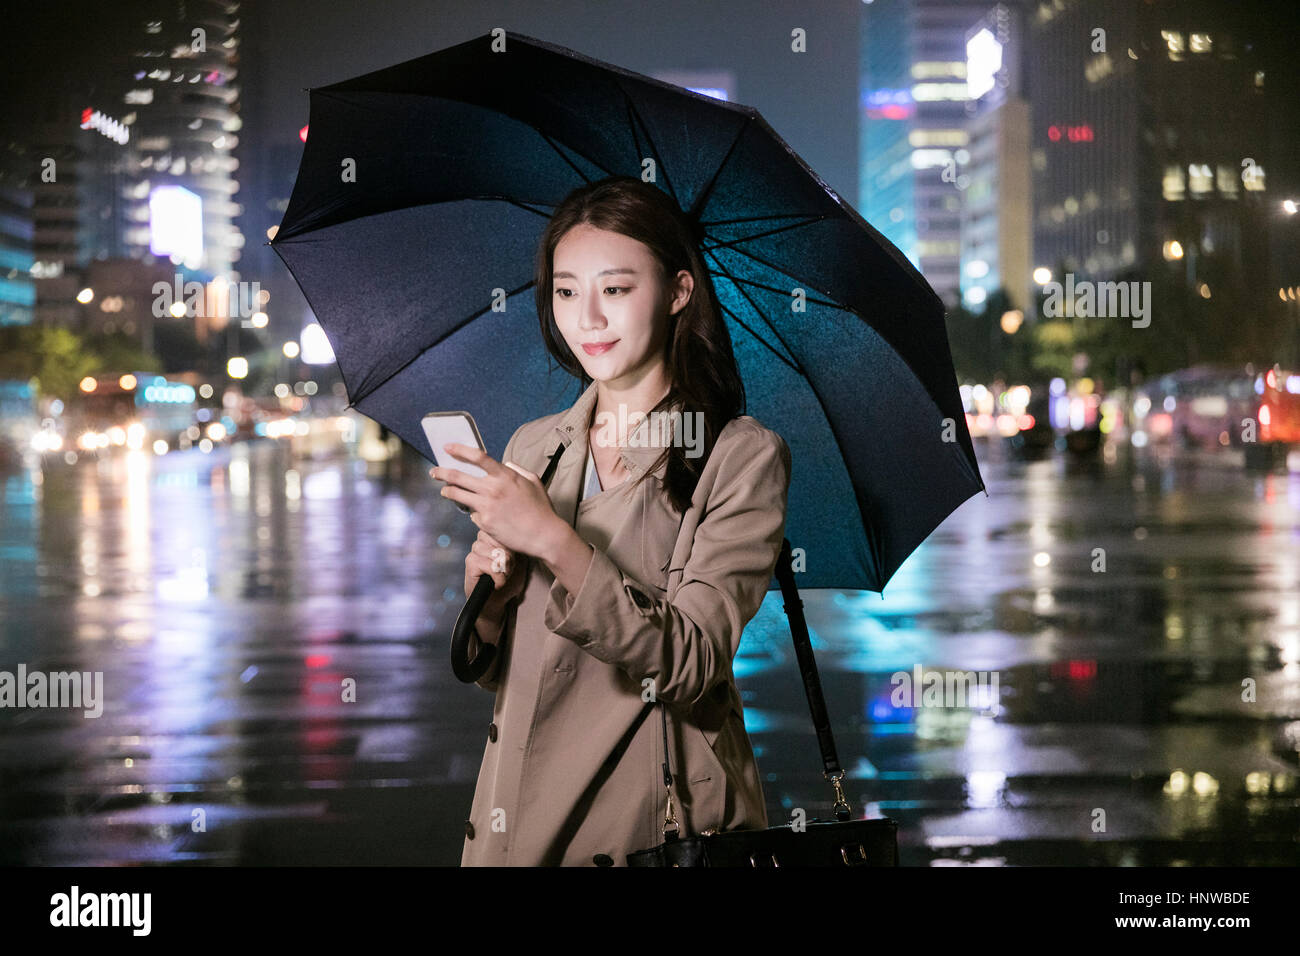 Young woman with umbrella in city at night Stock Photo